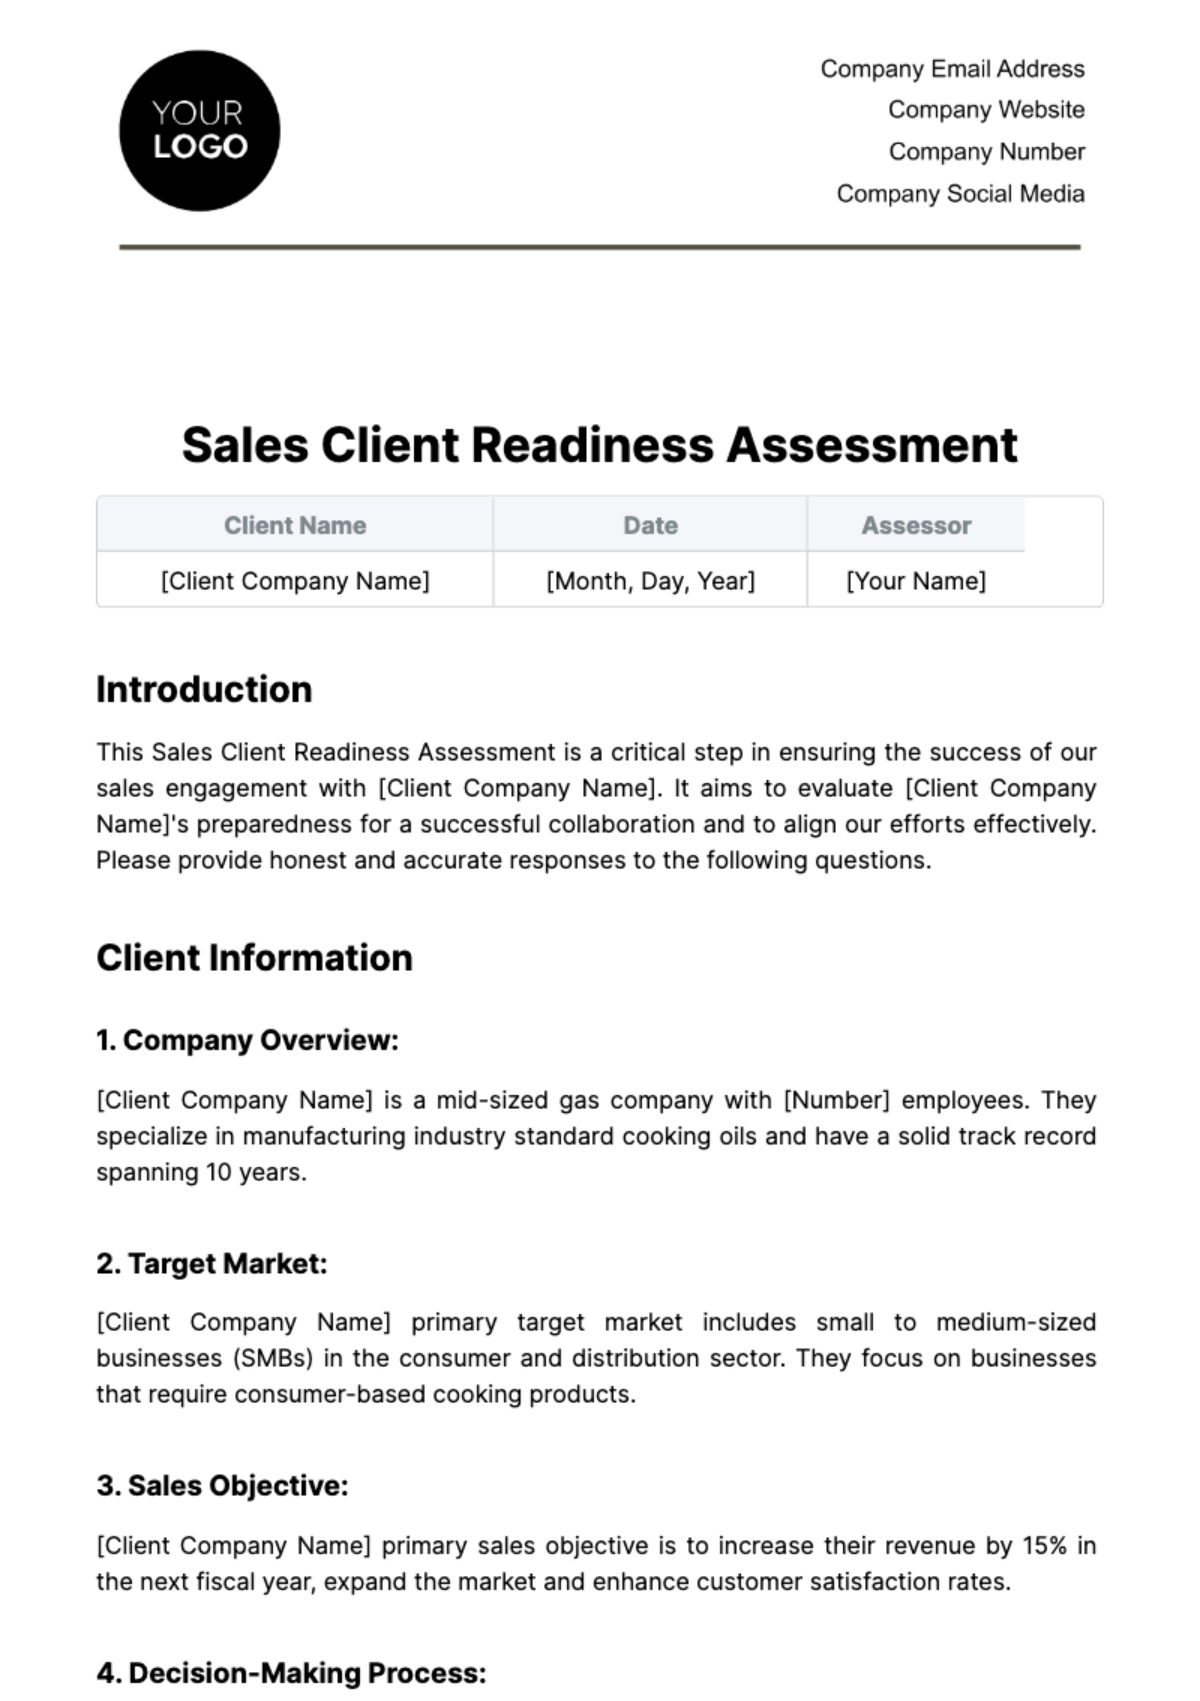 Sales Client Readiness Assessment Template